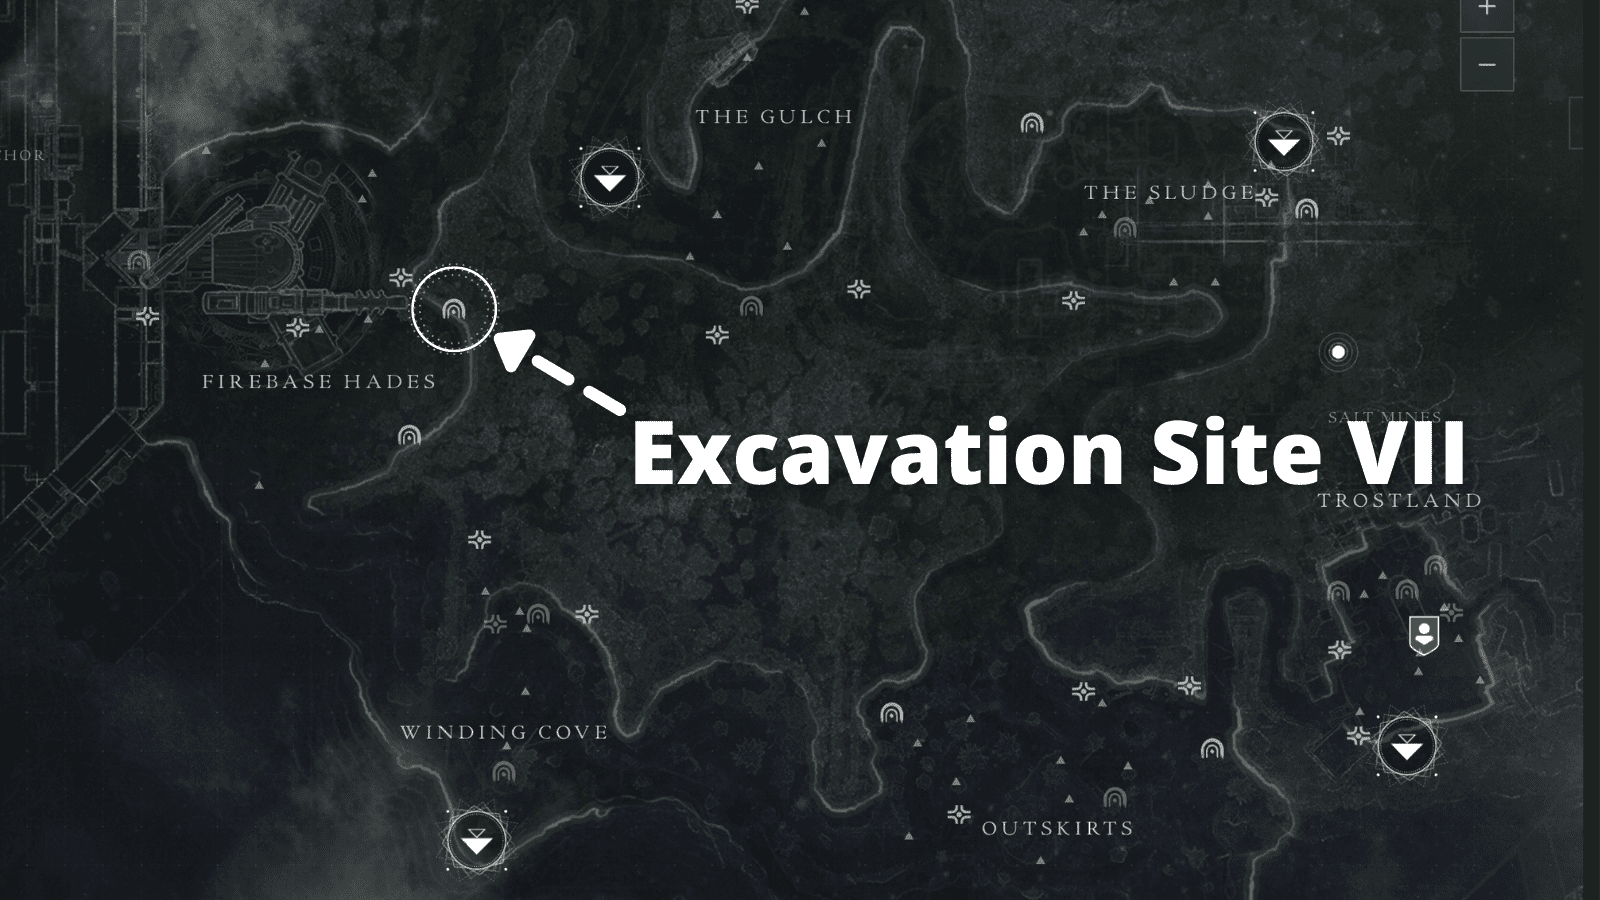 Best Lost Sector To Farm Excavation Site XII Lost Sector Destiny 2: Location & Loadouts